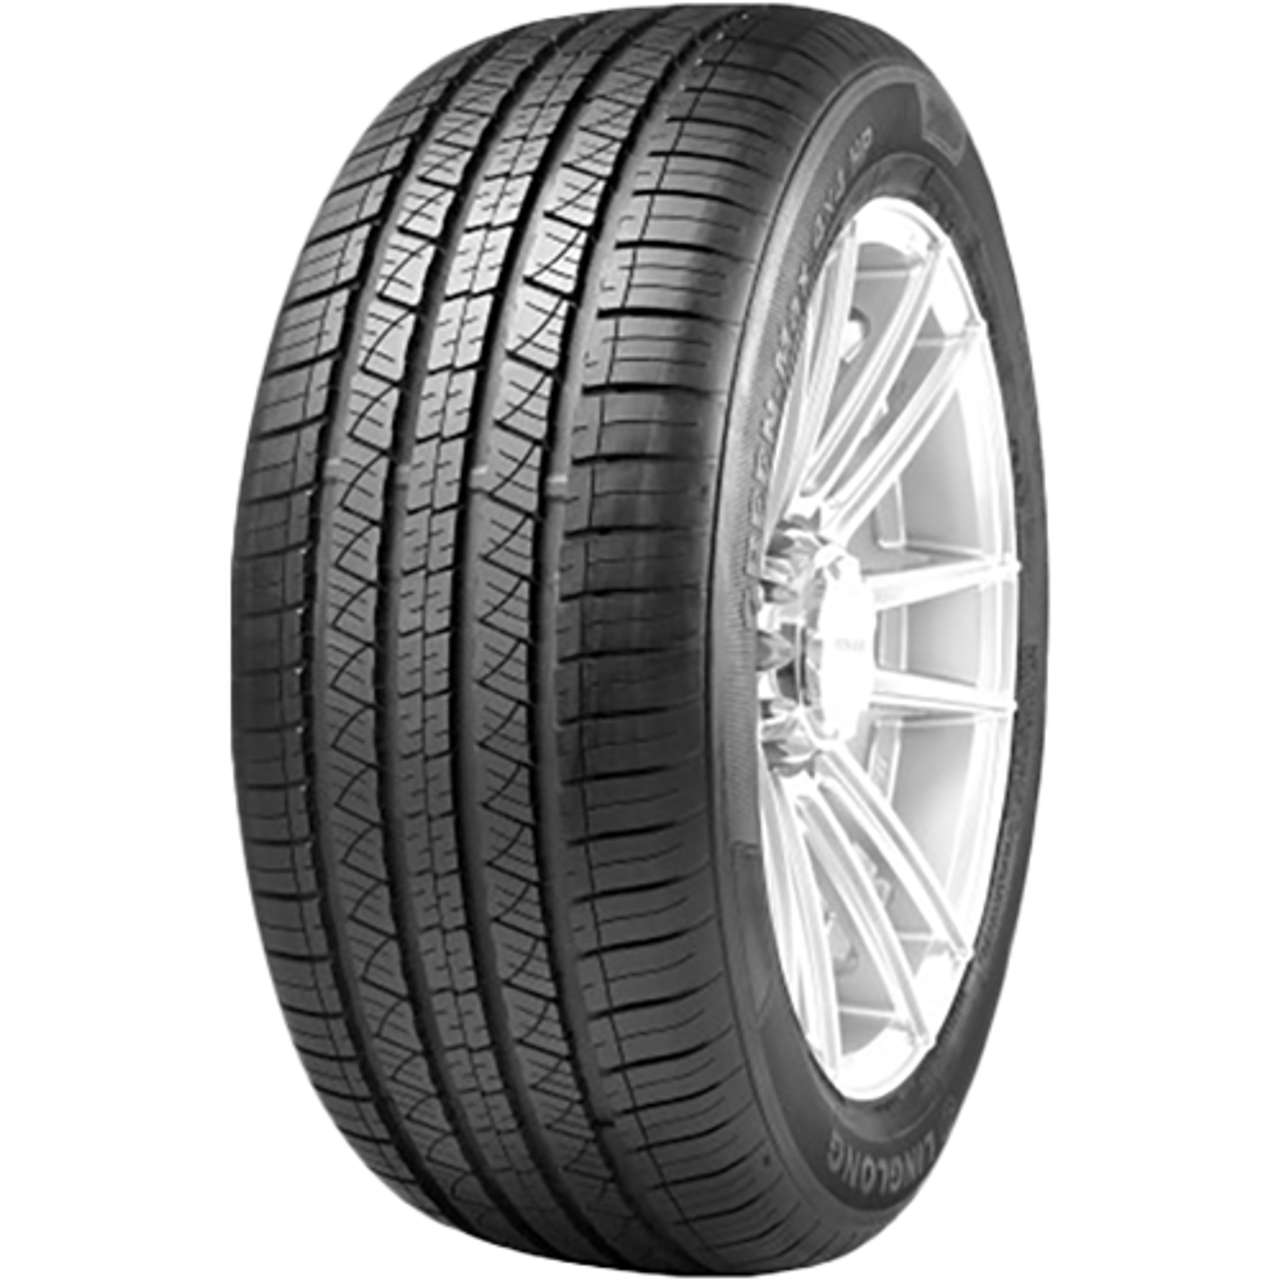 LINGLONG GREEN-MAX 4X4 HP 245/65R17 111H BSW von LINGLONG